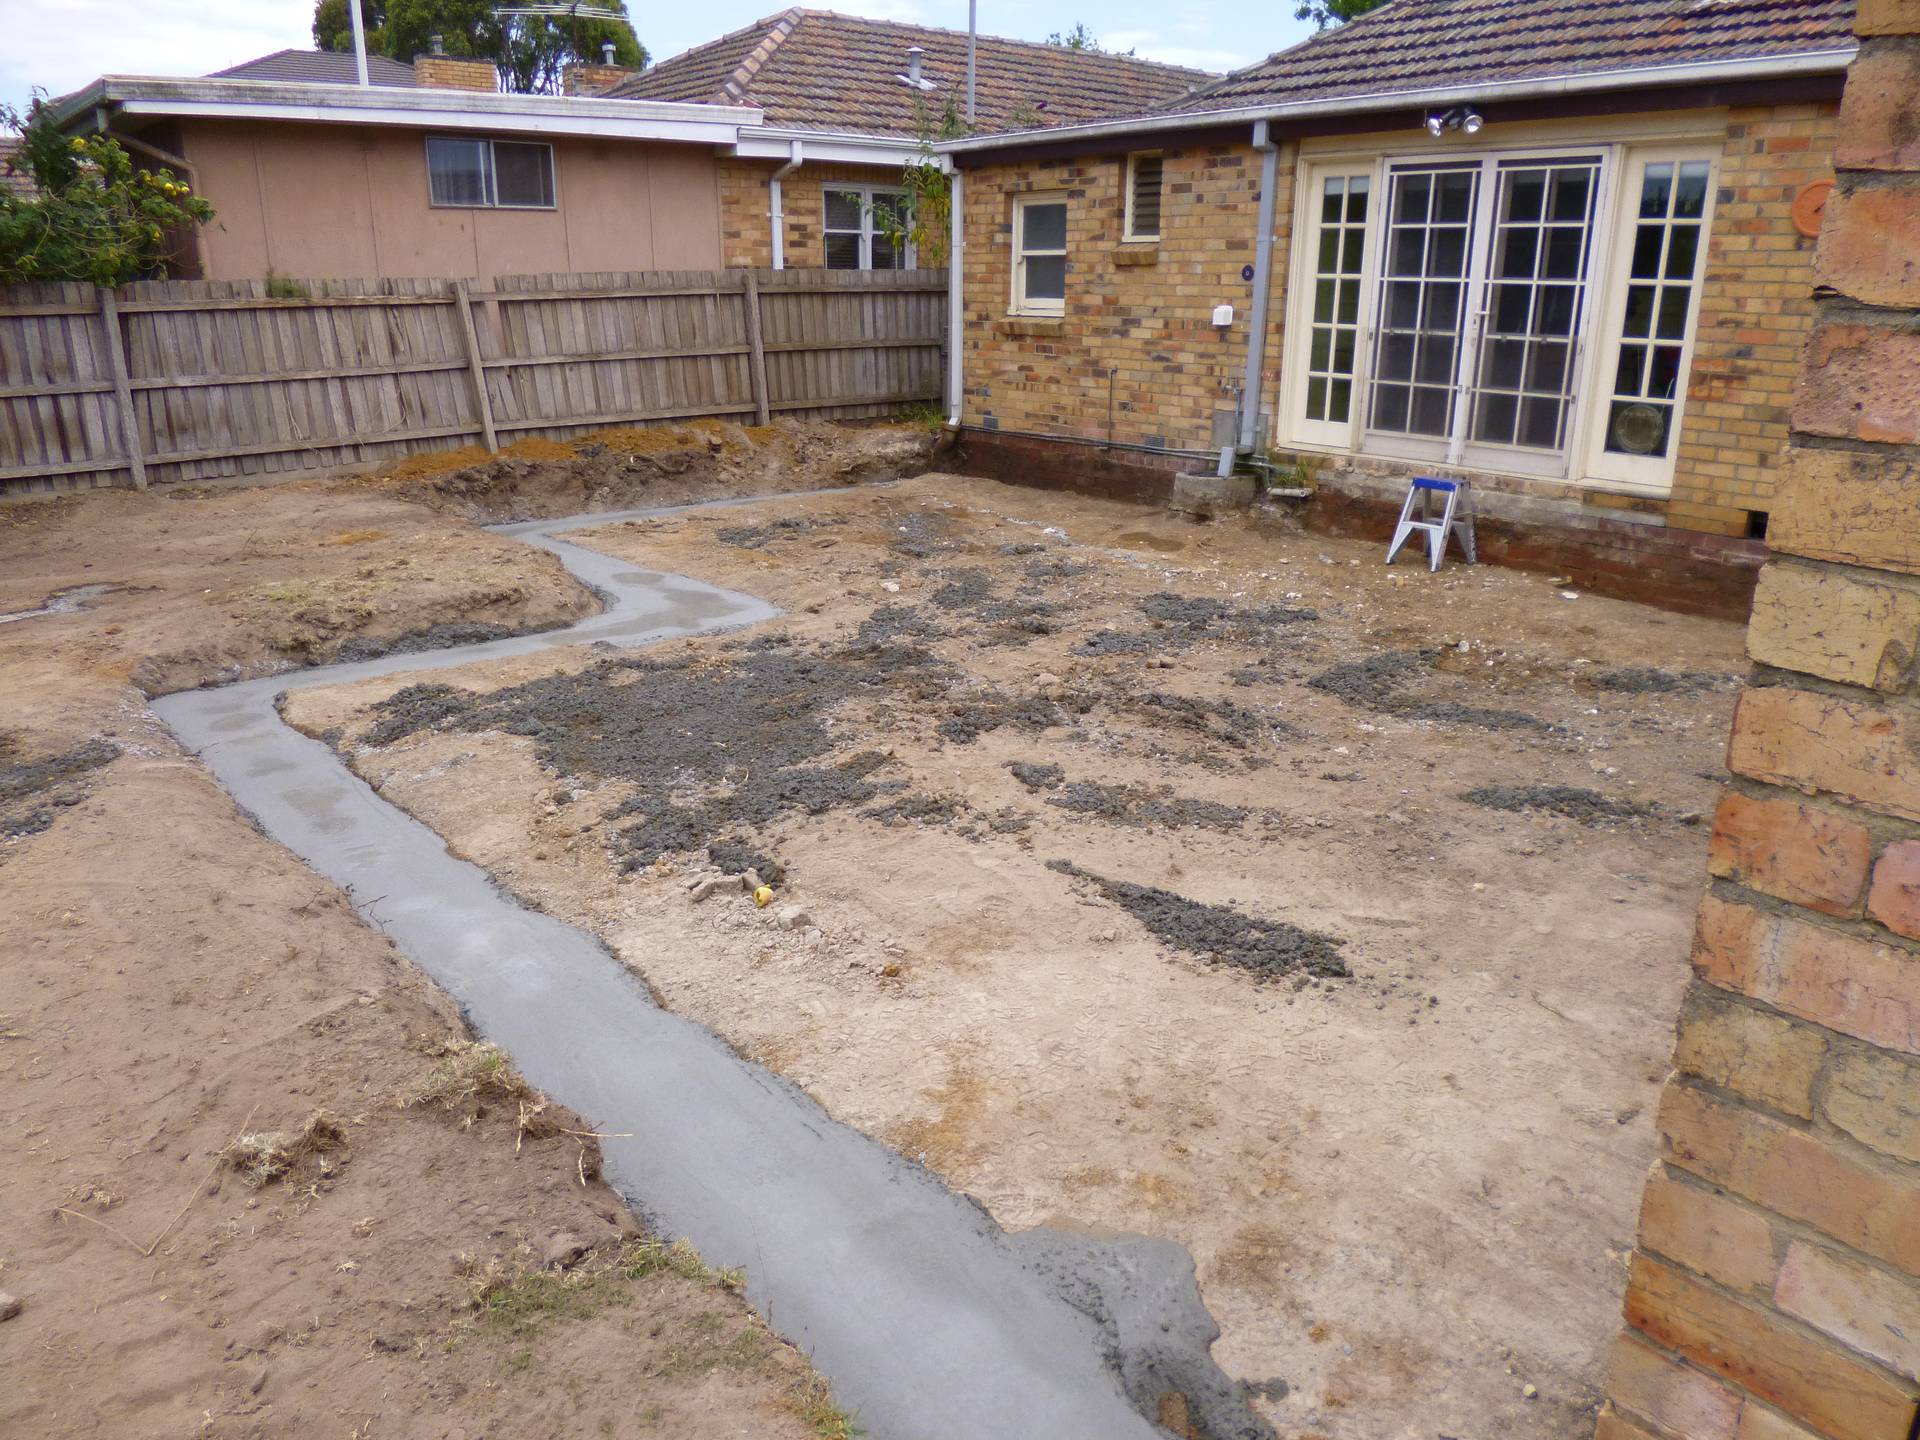 Excavation, and strip footings have been poured.